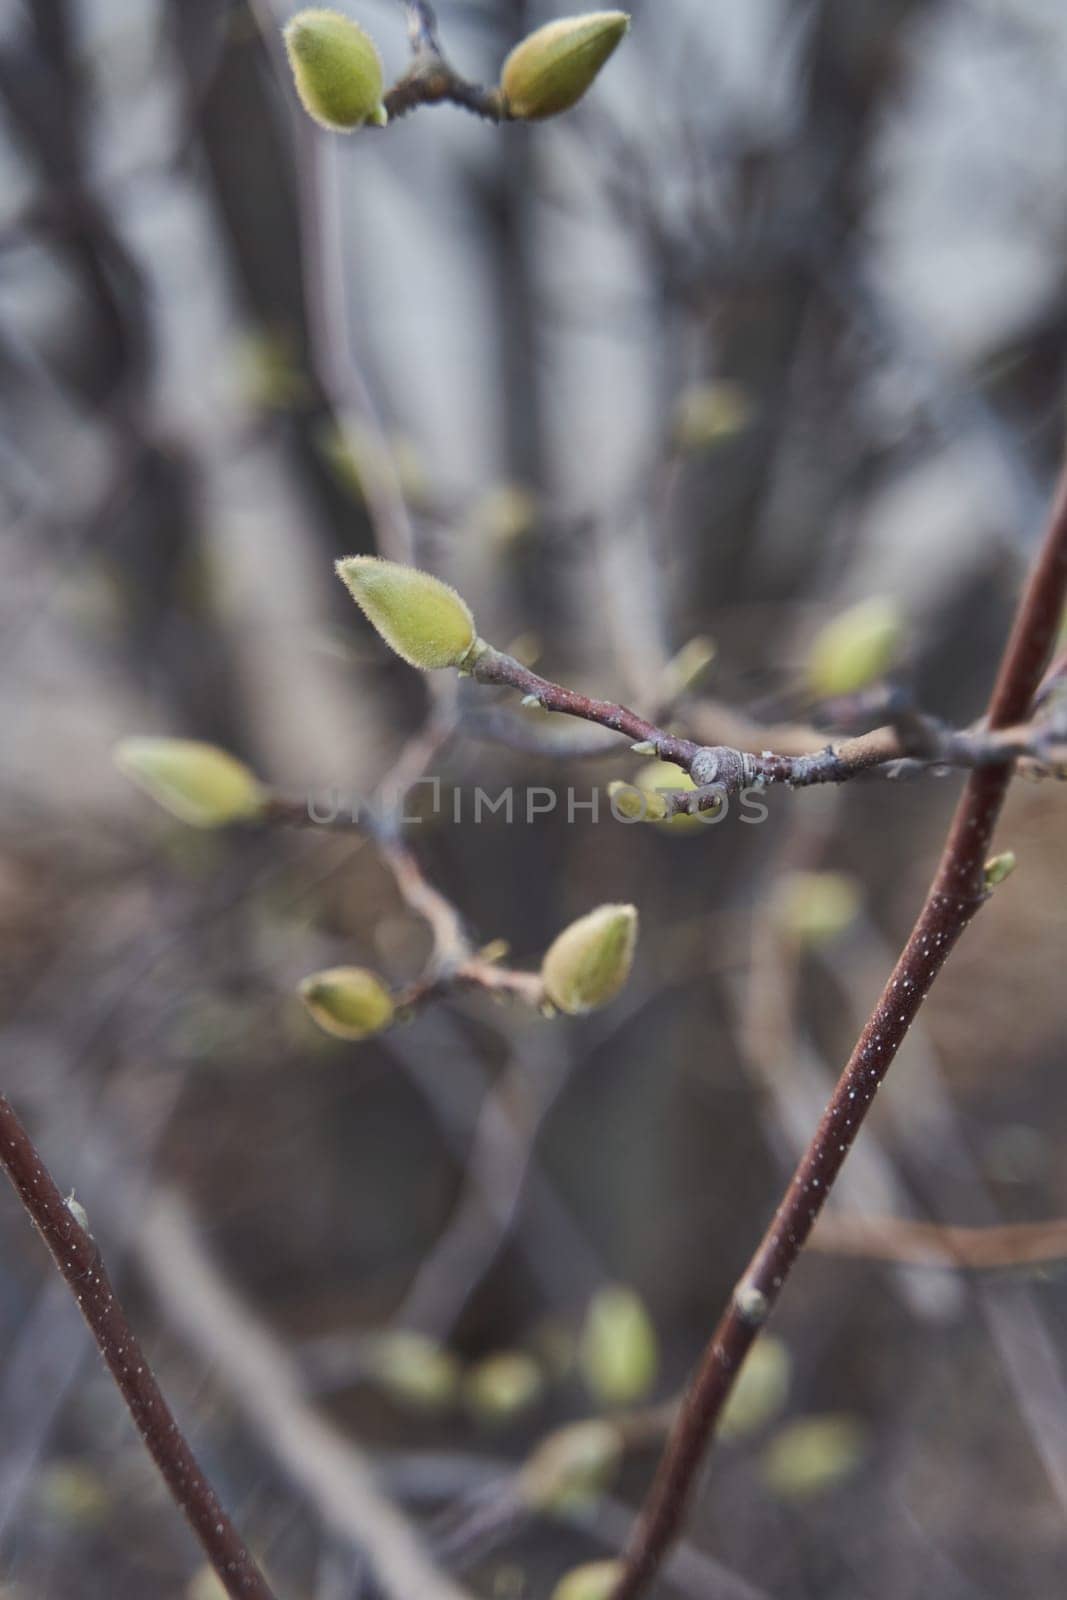 A detailed shot of a tree twig with emerging buds, showcasing the beauty of a terrestrial plants growth process